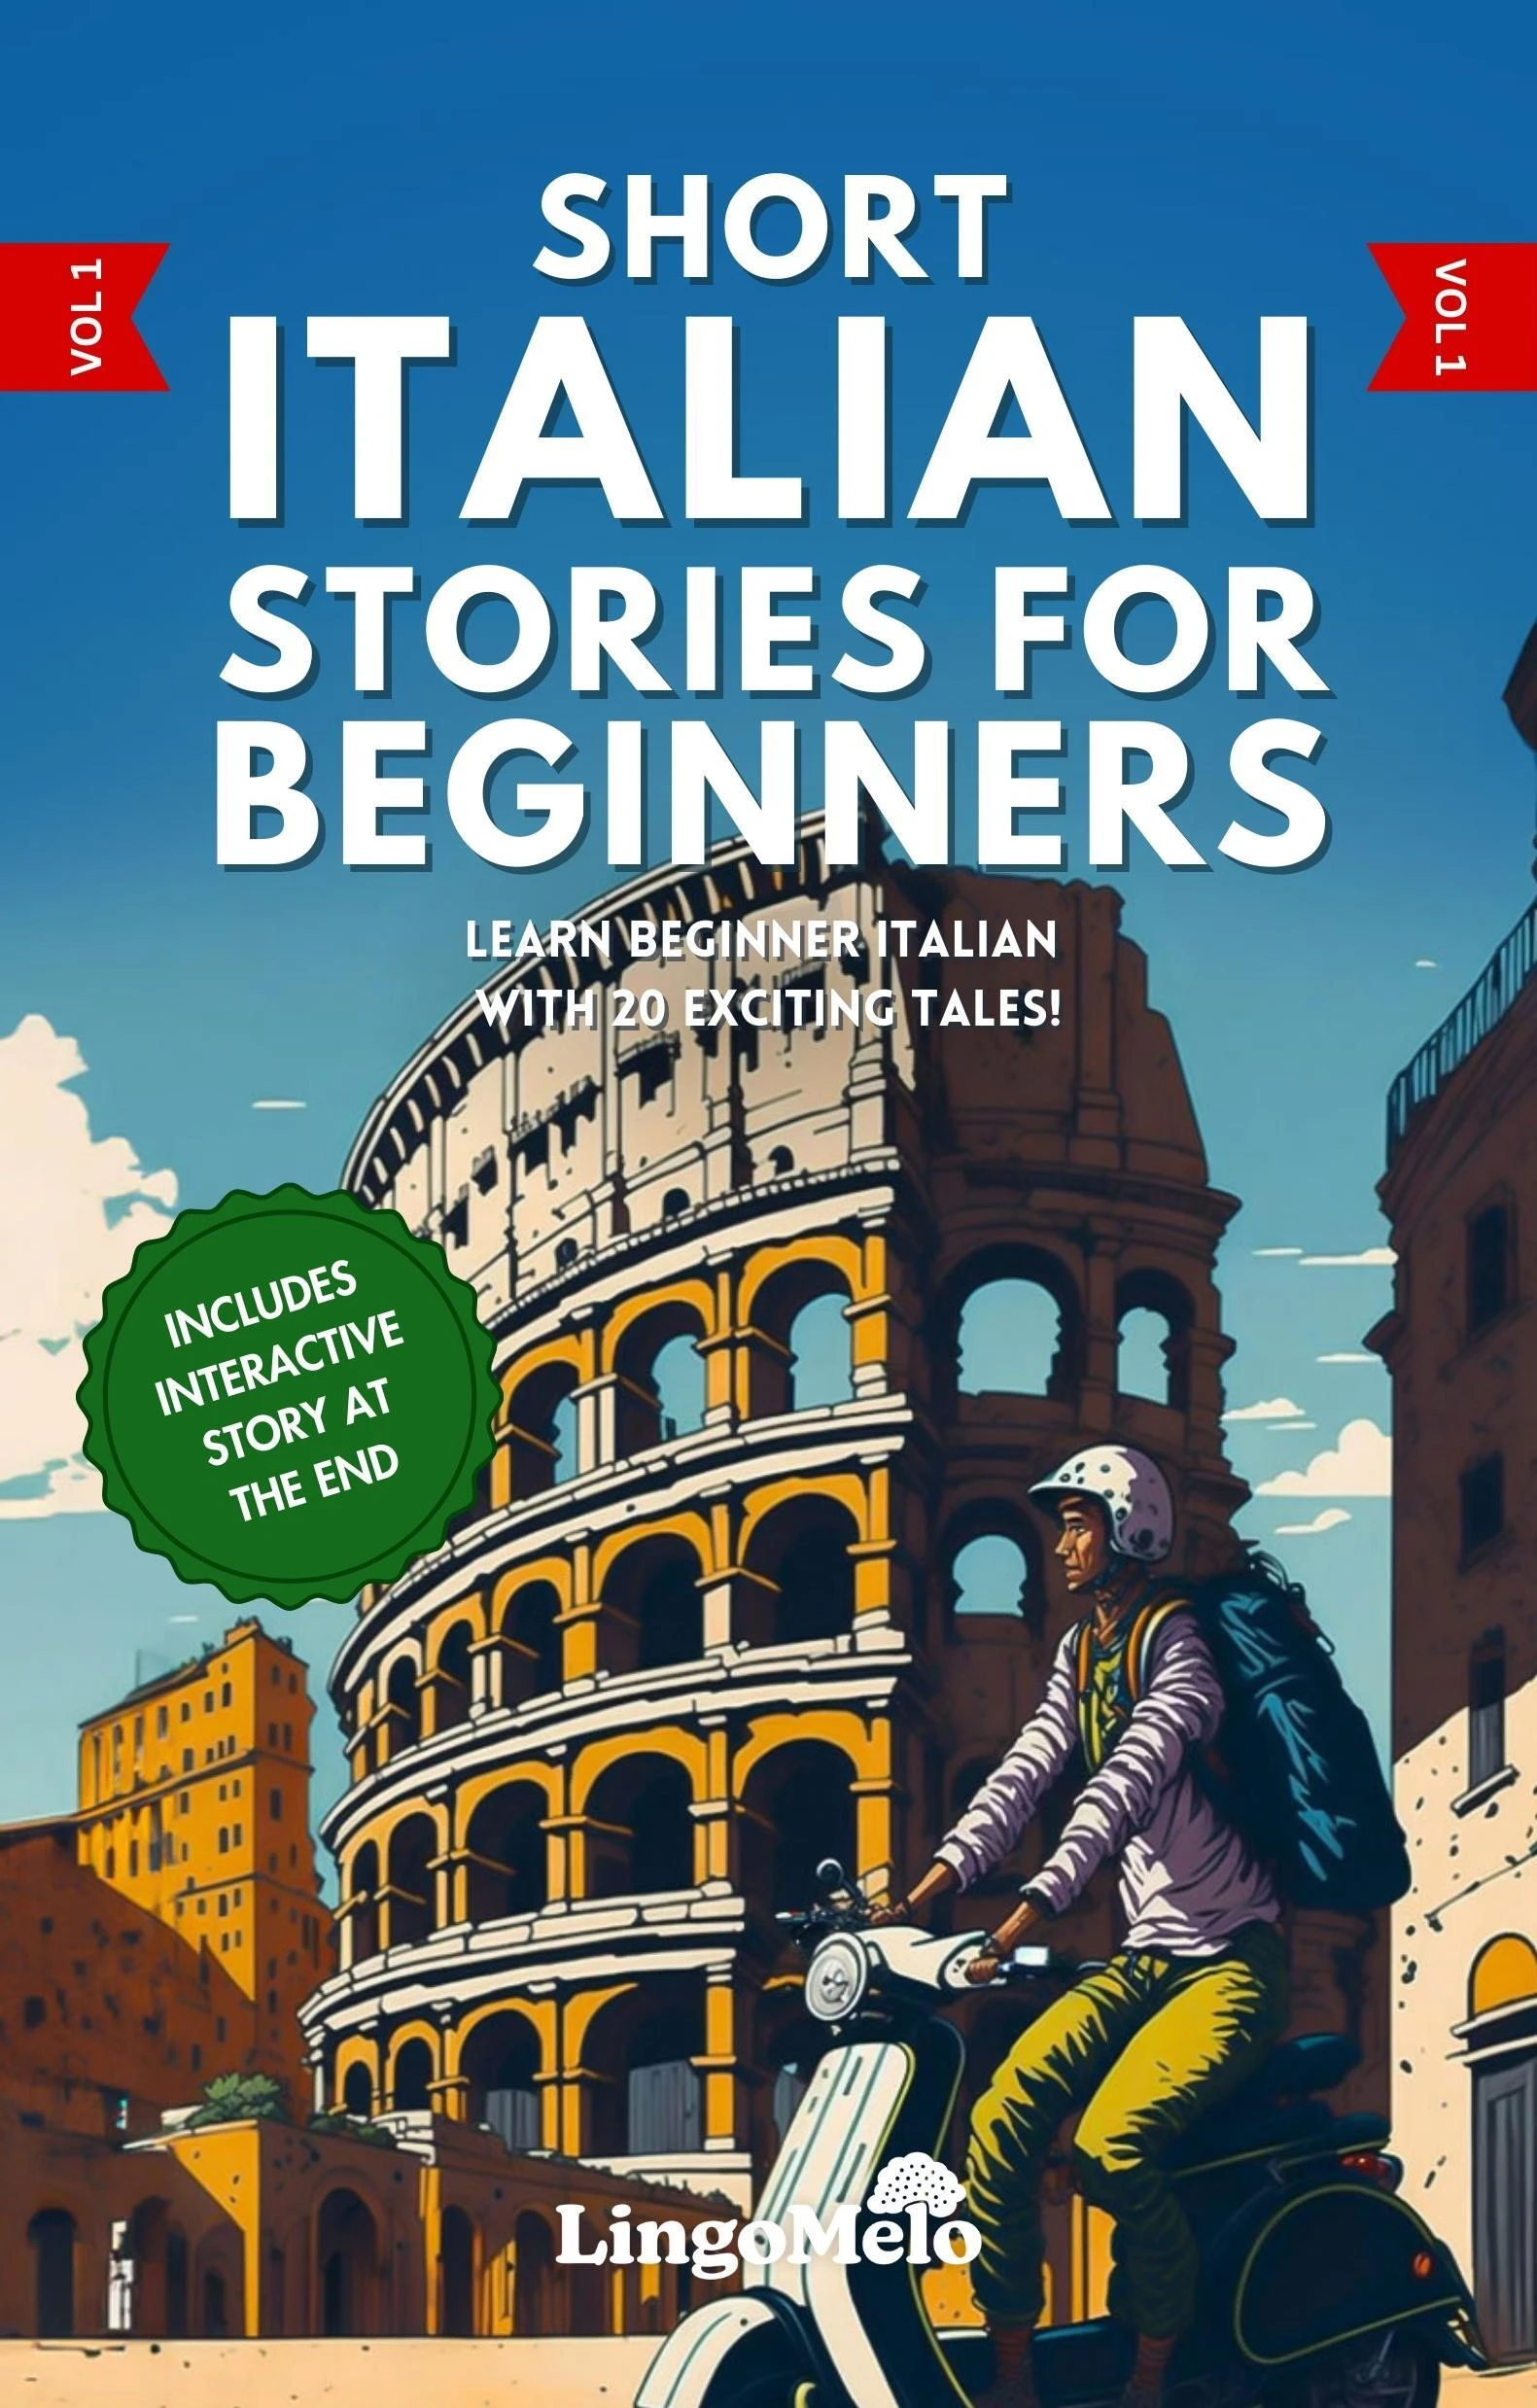 Short Italian Stories for Beginners: Learn Beginner Italian With 20 Exciting Tales! (Easy Italian Lessons) (Italian Edition)